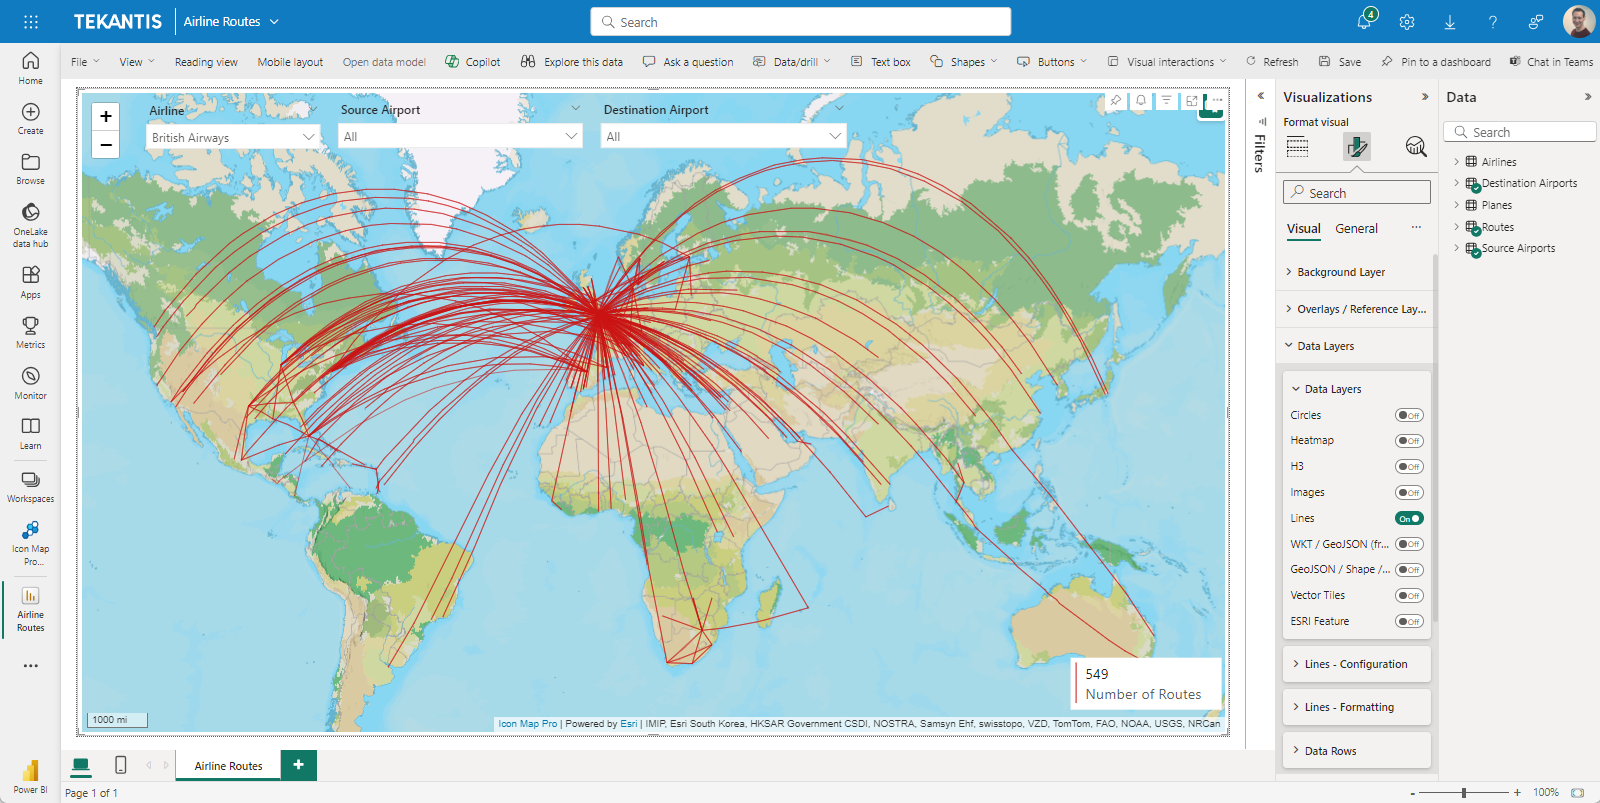 An example report built using Icon Map Pro showing Airline Routes